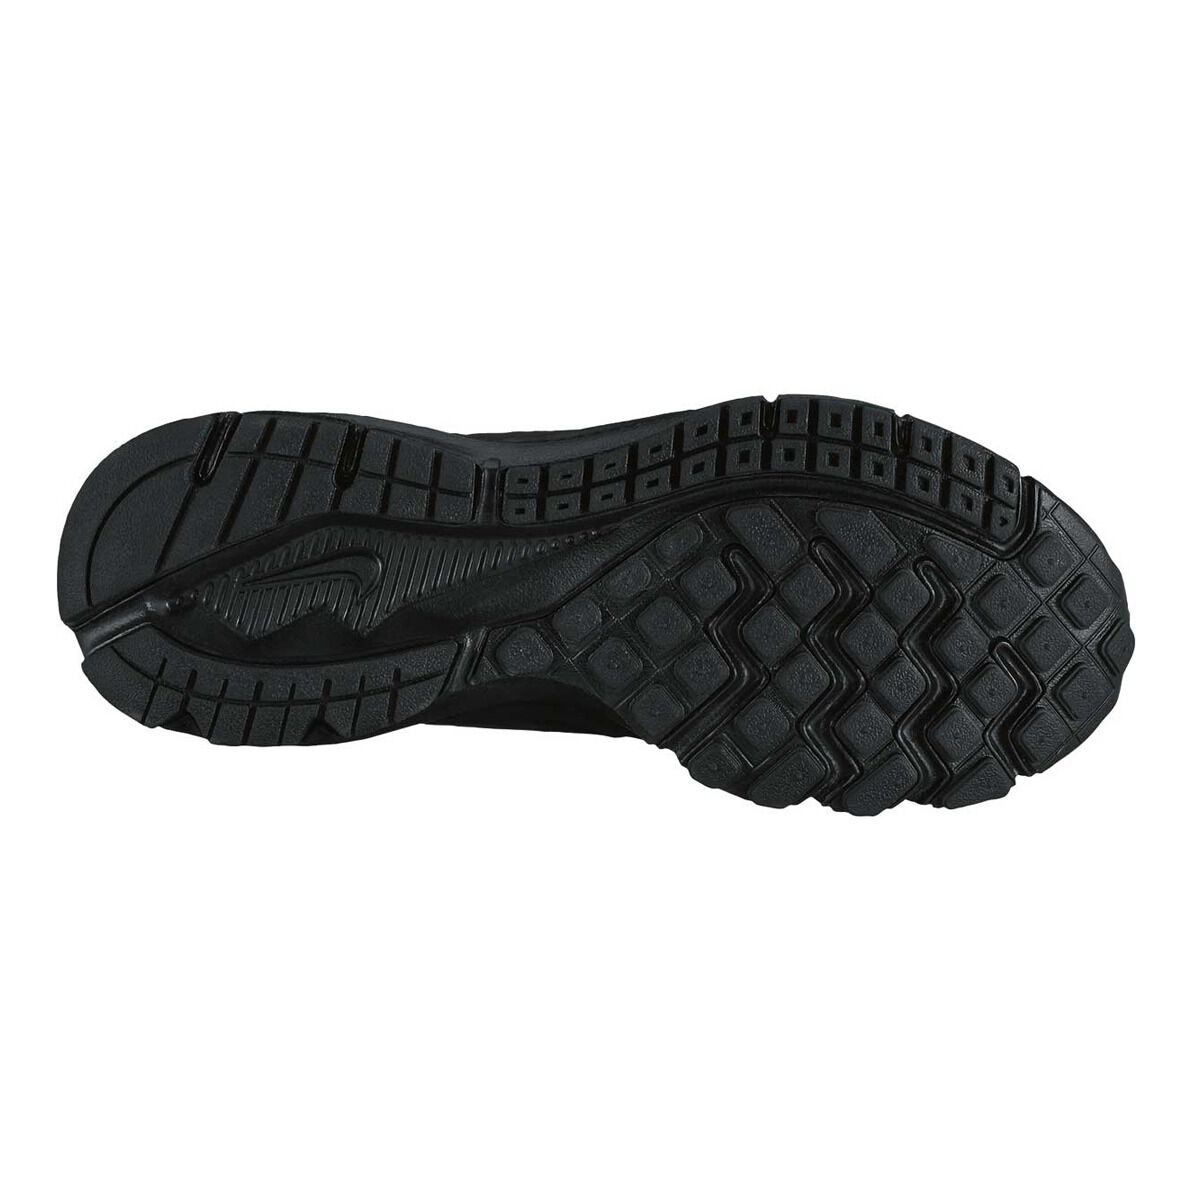 nike downshifter 6 price